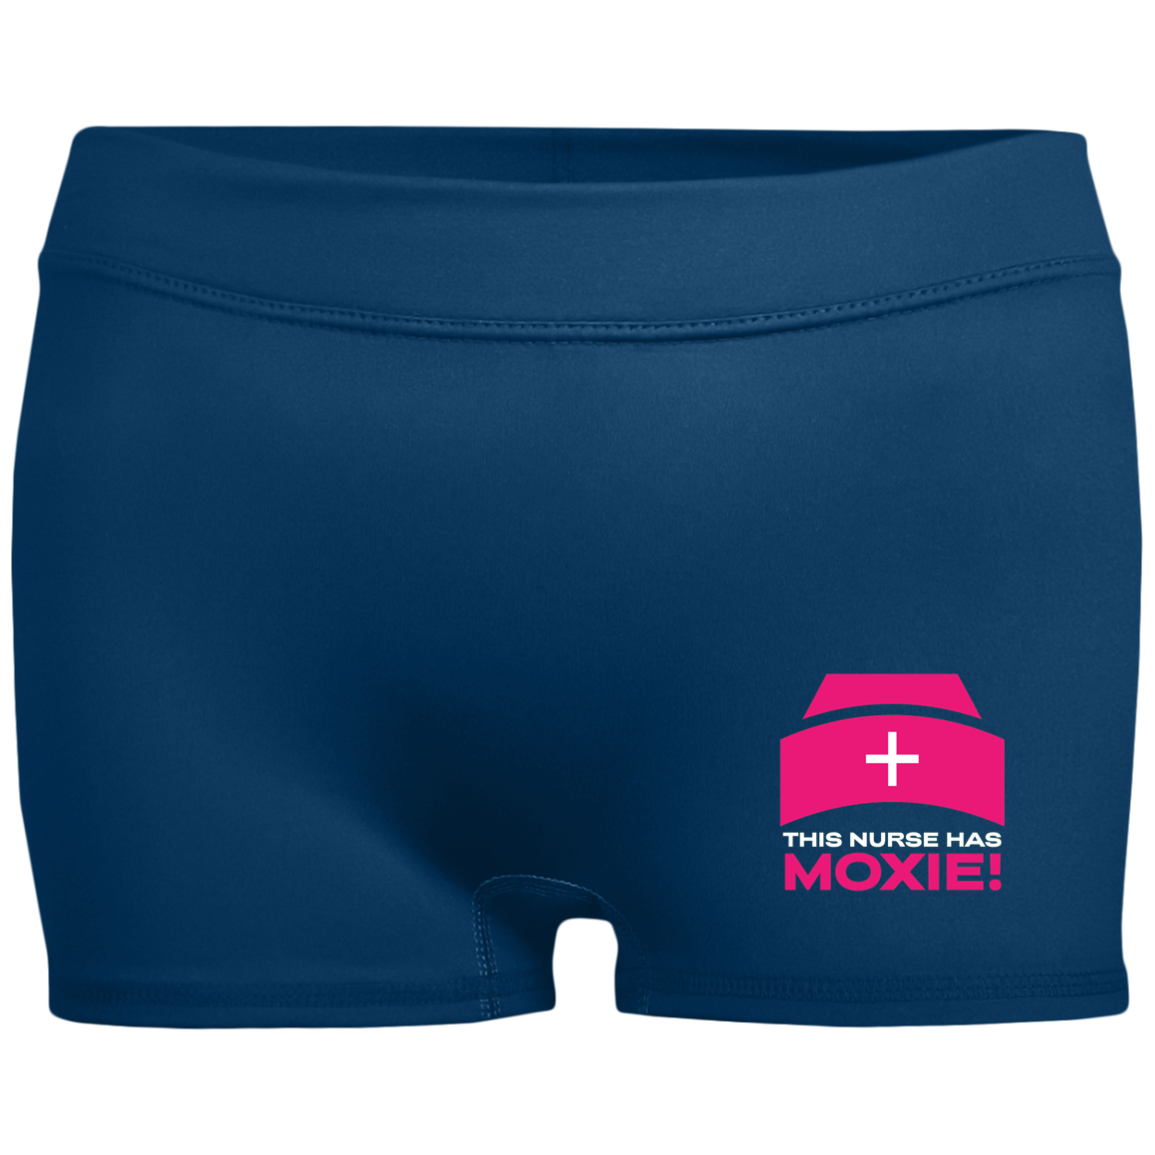 MOXIE Ladies Fitted Moisture-Wicking 2.5 inch Inseam Shorts